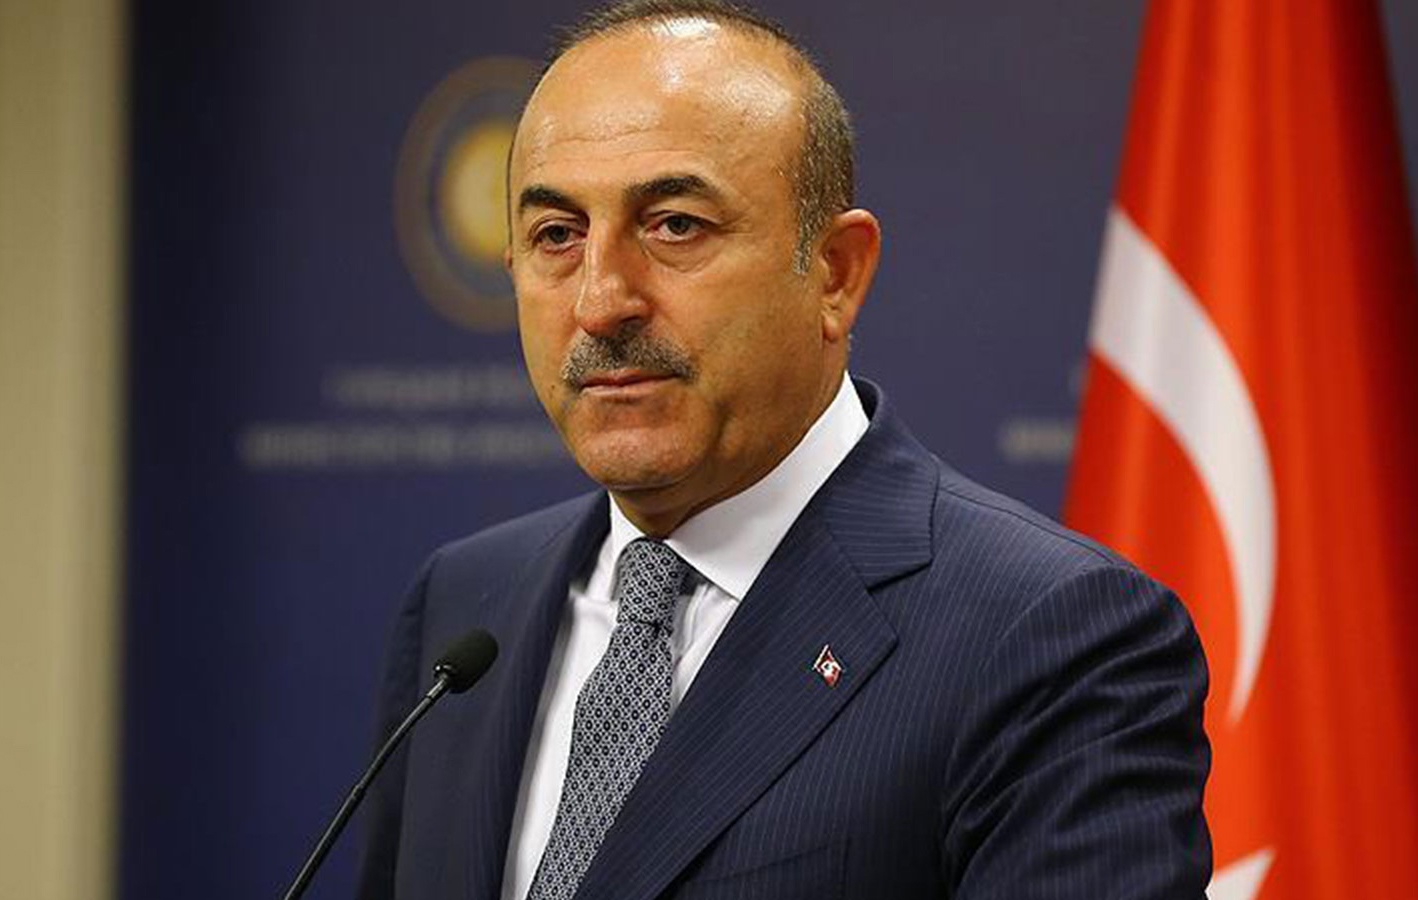 Tell us to our face, Turkish FM says to Macron over Algeria remarks 111